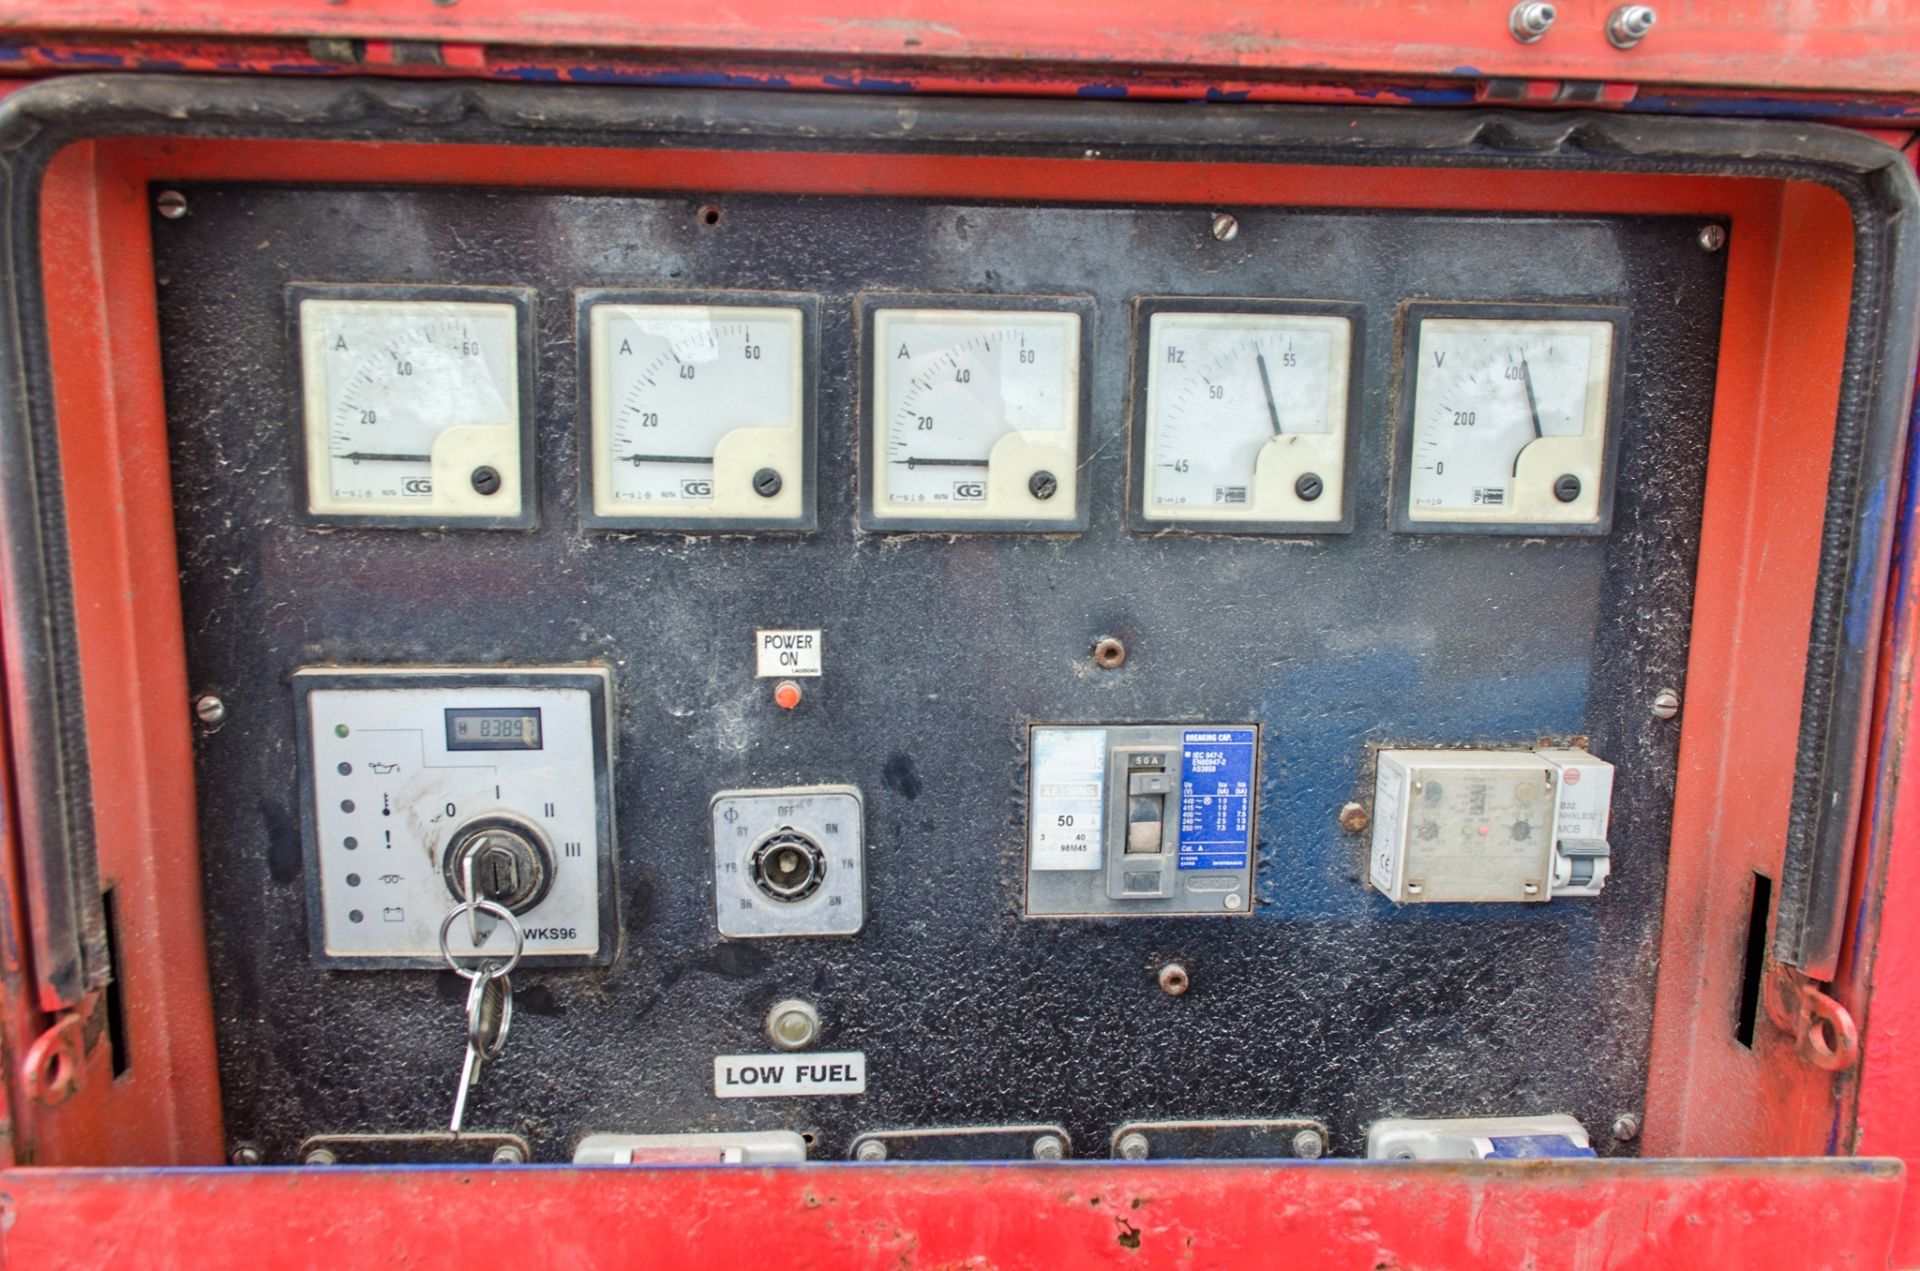 SMC G30 30 kva diesel driven generator S/N: G30092263 Recorded Hours: 8389 - Image 3 of 9